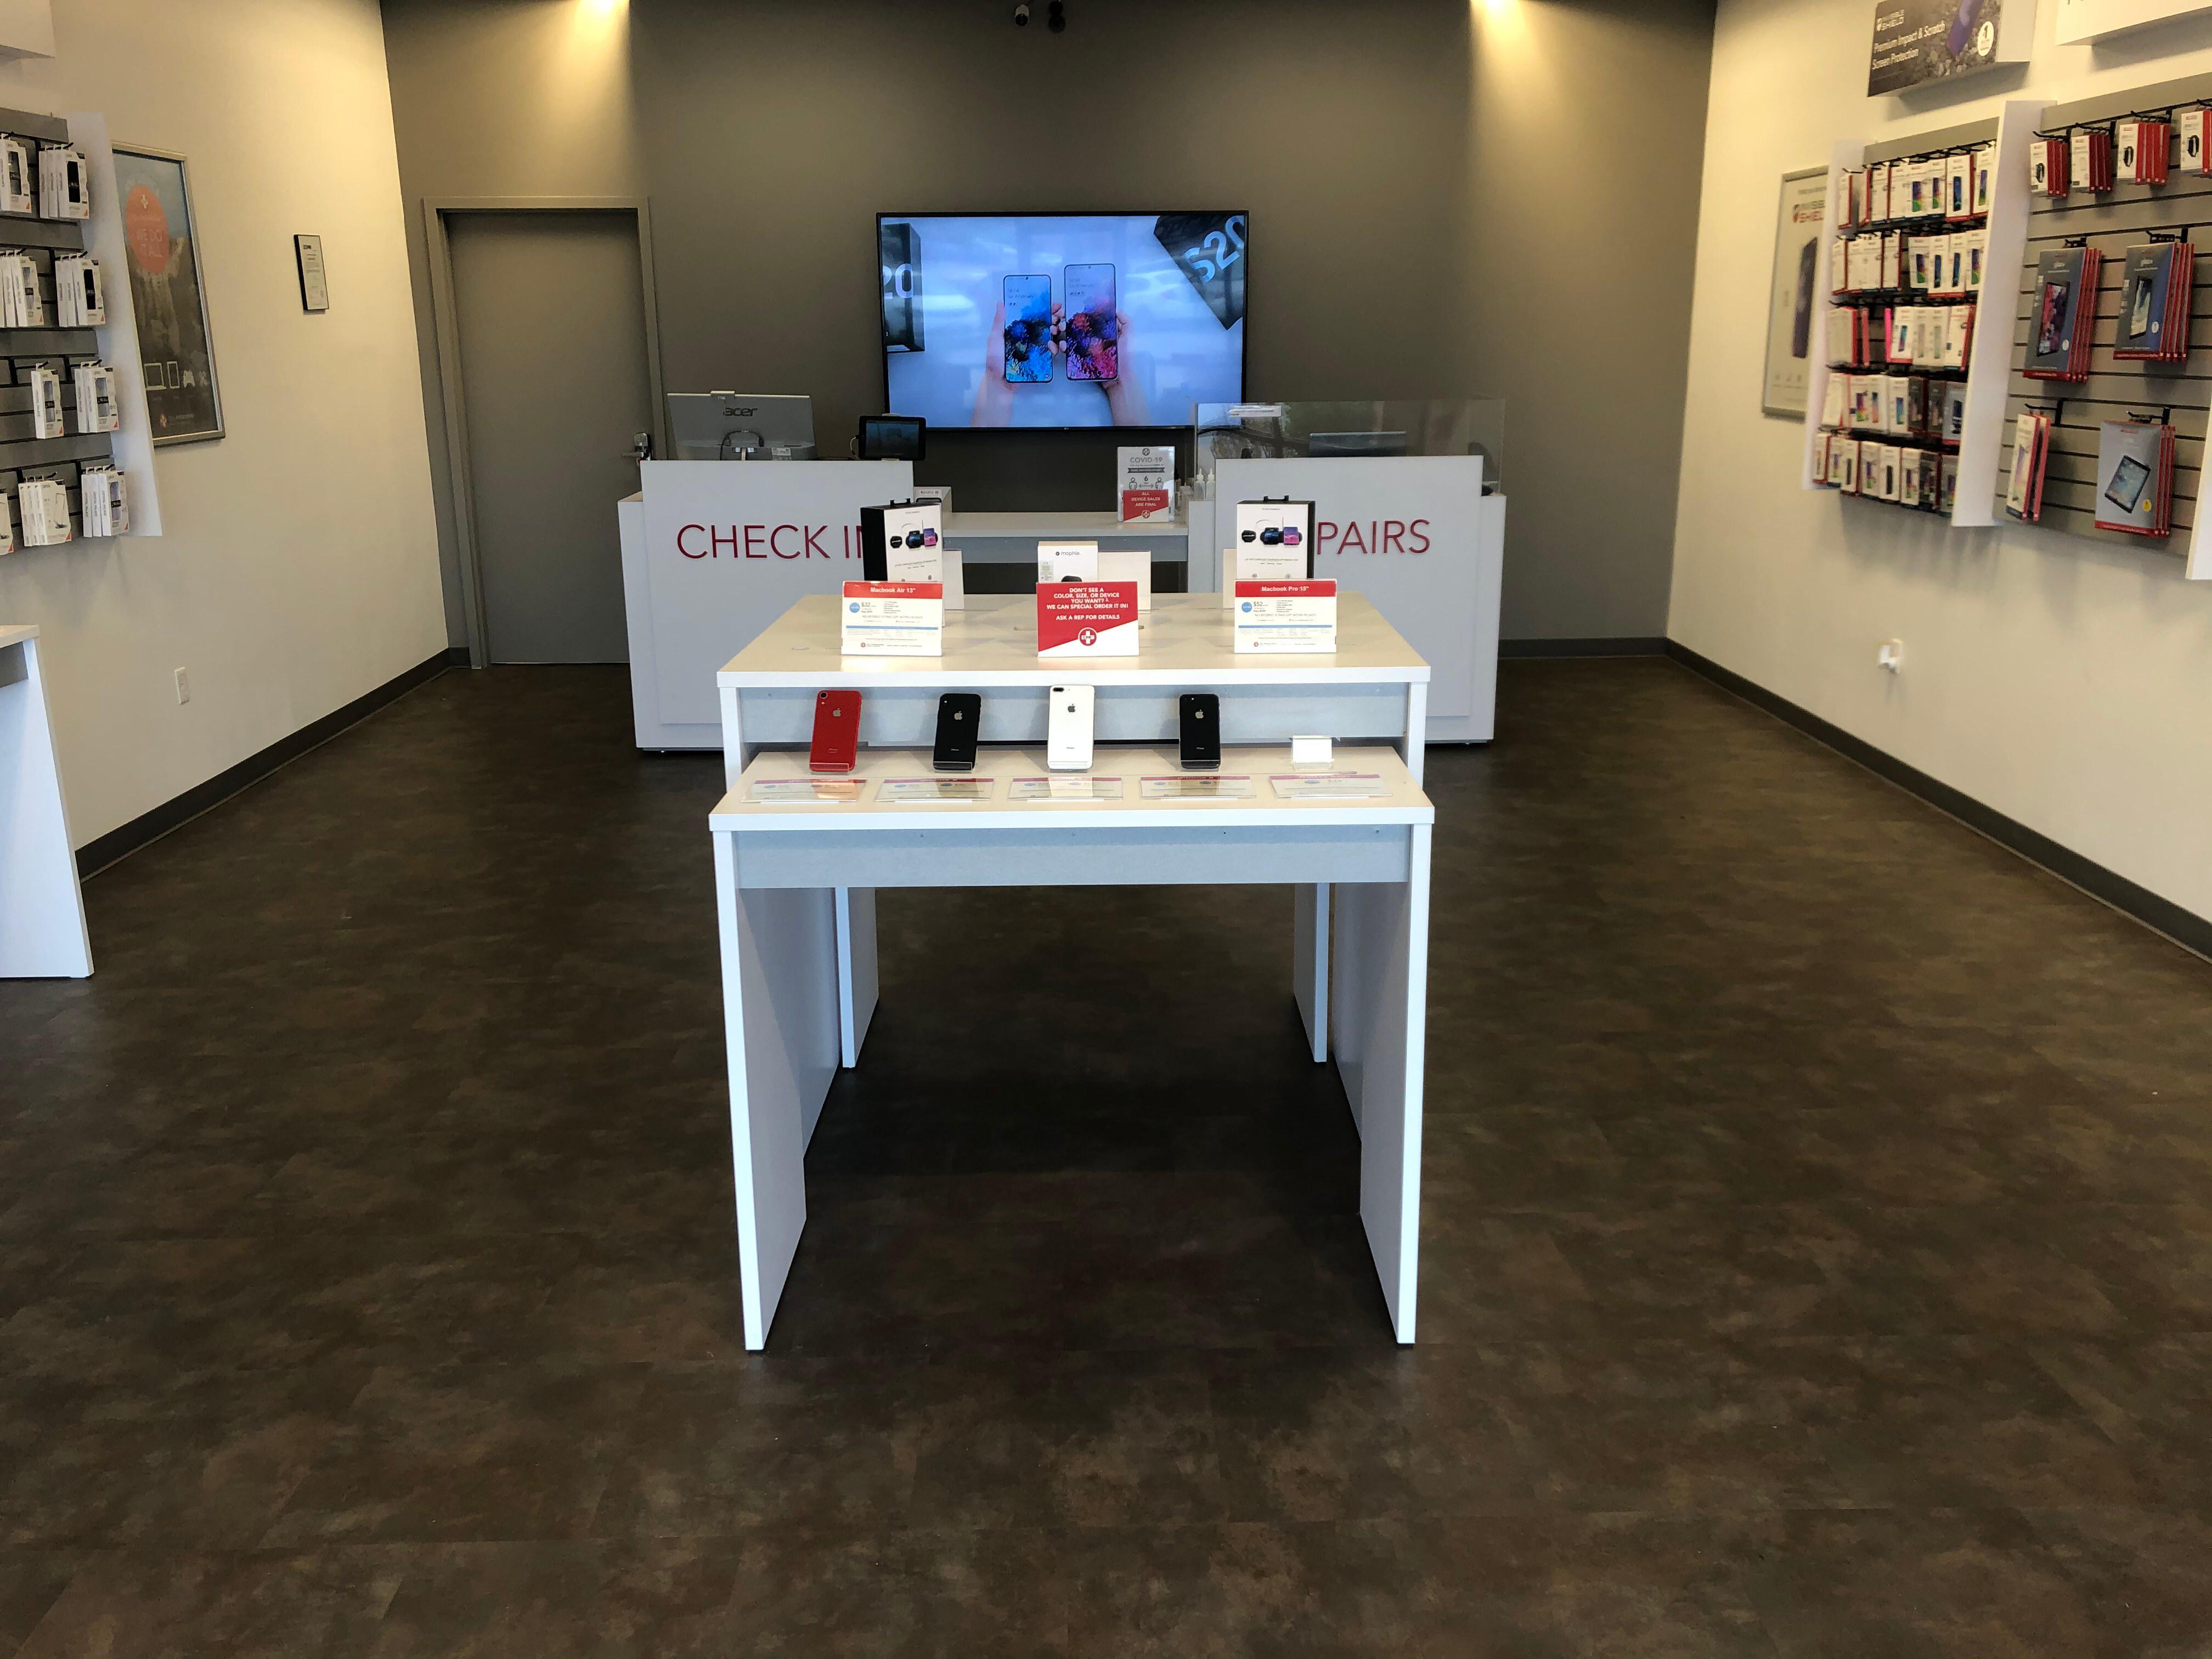 Store Interior Image of CPR Cell Phone Repair Crestwood MO